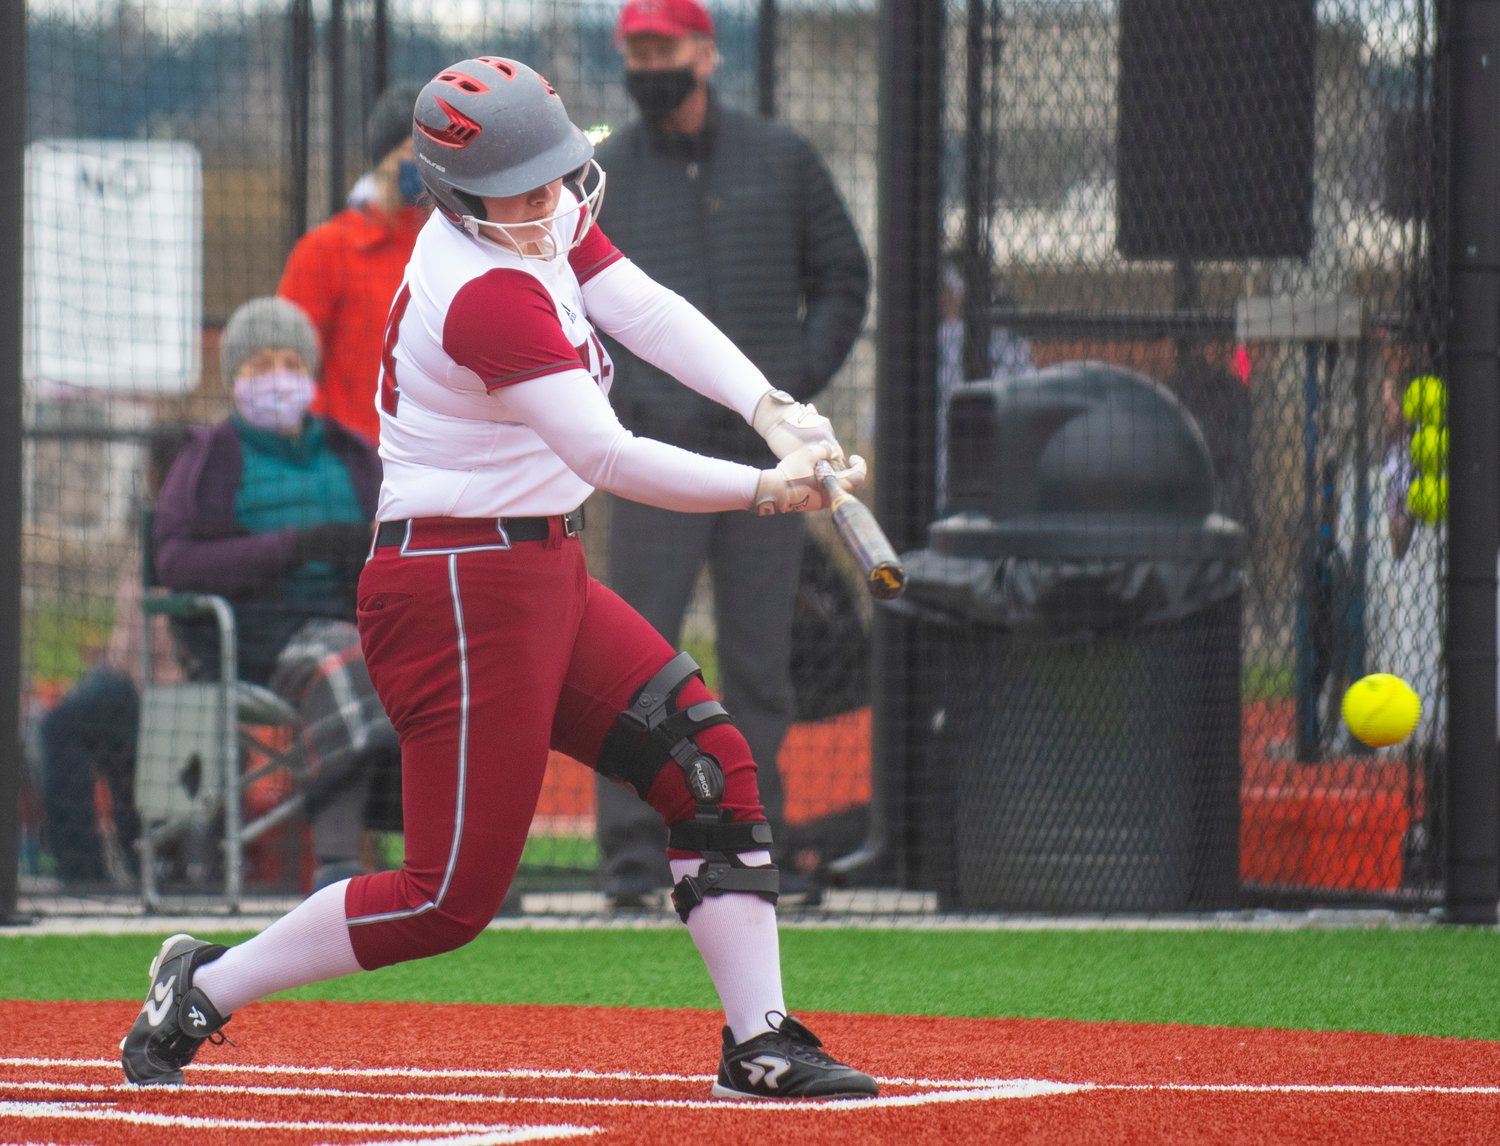 W.F. West sophomore Savannah Hawkins connects on an Aberdeen pitch on Wednesday.